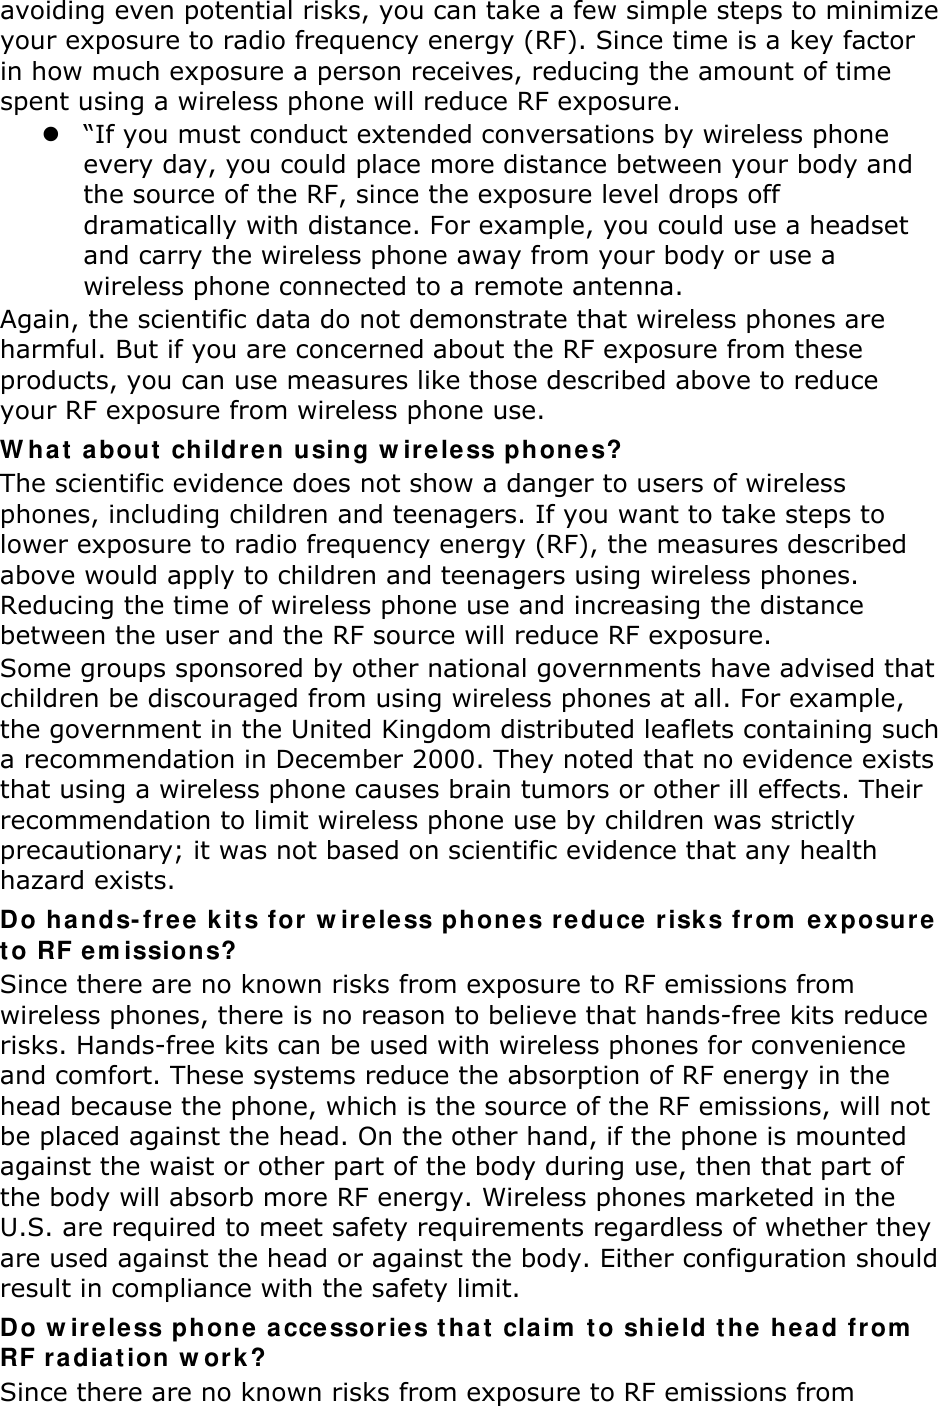 avoiding even potential risks, you can take a few simple steps to minimize your exposure to radio frequency energy (RF). Since time is a key factor in how much exposure a person receives, reducing the amount of time spent using a wireless phone will reduce RF exposure. z “If you must conduct extended conversations by wireless phone every day, you could place more distance between your body and the source of the RF, since the exposure level drops off dramatically with distance. For example, you could use a headset and carry the wireless phone away from your body or use a wireless phone connected to a remote antenna. Again, the scientific data do not demonstrate that wireless phones are harmful. But if you are concerned about the RF exposure from these products, you can use measures like those described above to reduce your RF exposure from wireless phone use. W hat  about  children using w irele ss phone s? The scientific evidence does not show a danger to users of wireless phones, including children and teenagers. If you want to take steps to lower exposure to radio frequency energy (RF), the measures described above would apply to children and teenagers using wireless phones. Reducing the time of wireless phone use and increasing the distance between the user and the RF source will reduce RF exposure. Some groups sponsored by other national governments have advised that children be discouraged from using wireless phones at all. For example, the government in the United Kingdom distributed leaflets containing such a recommendation in December 2000. They noted that no evidence exists that using a wireless phone causes brain tumors or other ill effects. Their recommendation to limit wireless phone use by children was strictly precautionary; it was not based on scientific evidence that any health hazard exists.   Do hands- free k it s for w irele ss phones reduce r isk s from  exposure t o RF e m issions? Since there are no known risks from exposure to RF emissions from wireless phones, there is no reason to believe that hands-free kits reduce risks. Hands-free kits can be used with wireless phones for convenience and comfort. These systems reduce the absorption of RF energy in the head because the phone, which is the source of the RF emissions, will not be placed against the head. On the other hand, if the phone is mounted against the waist or other part of the body during use, then that part of the body will absorb more RF energy. Wireless phones marketed in the U.S. are required to meet safety requirements regardless of whether they are used against the head or against the body. Either configuration should result in compliance with the safety limit. Do w ireless phon e  accessories t ha t cla im  t o shield t he  he a d fr om  RF radia t ion w or k ? Since there are no known risks from exposure to RF emissions from 